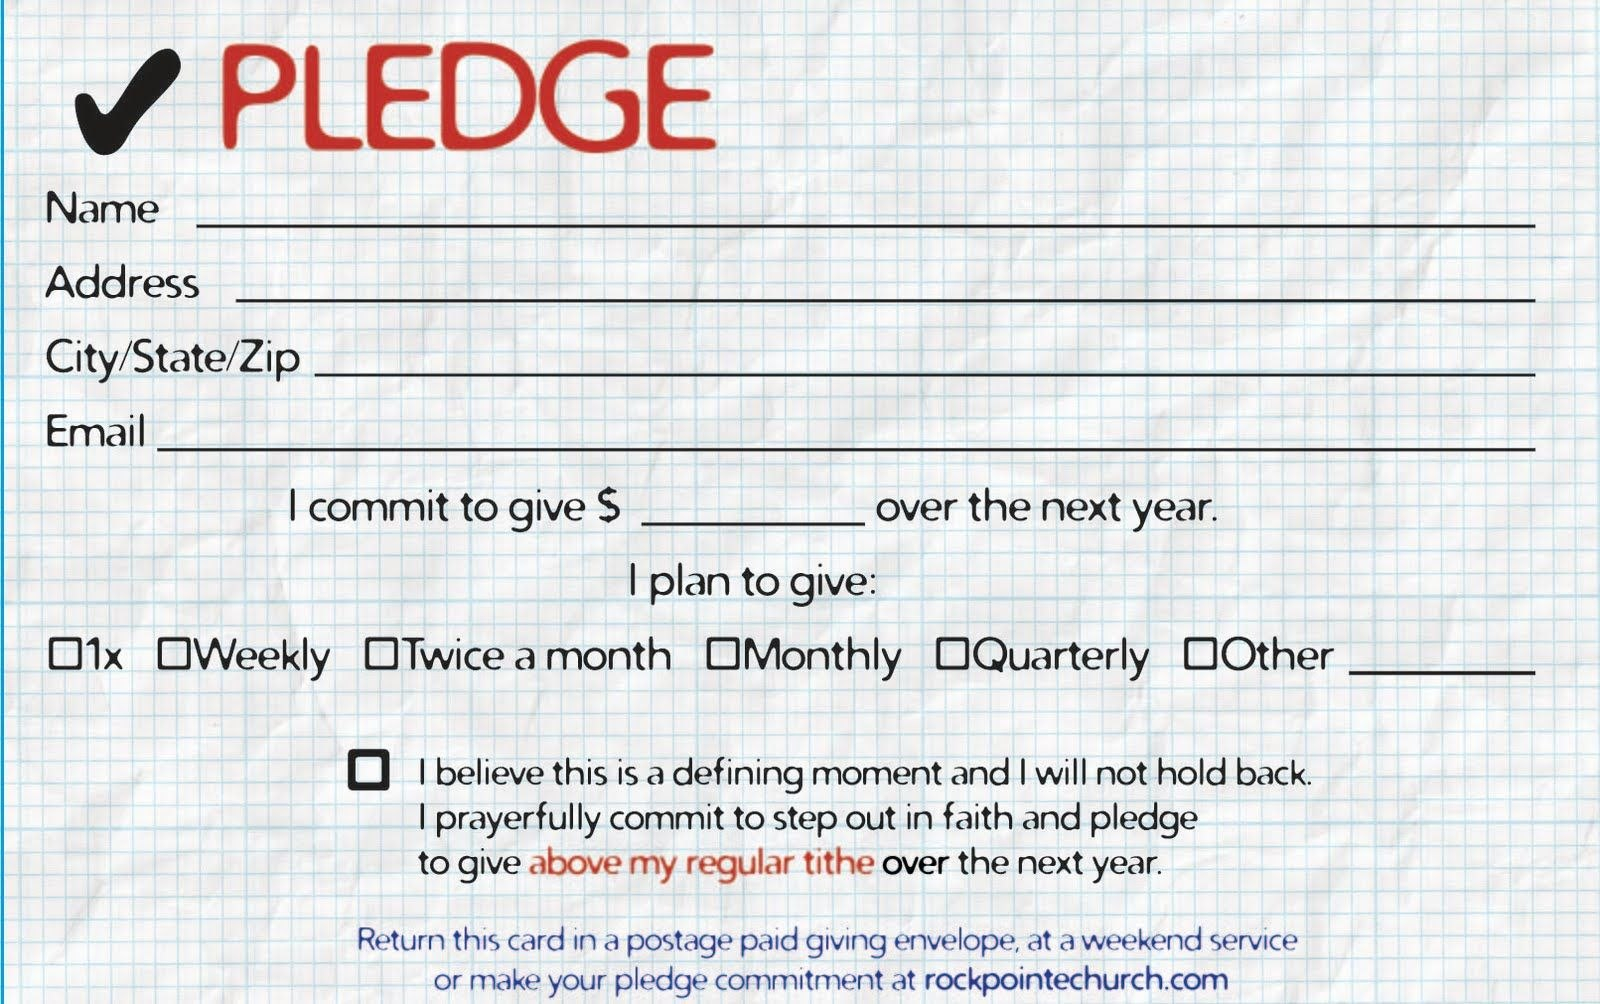 Pledge Cards For Churches  Pledge Card Templates  My Stuff throughout Building Fund Pledge Card Template